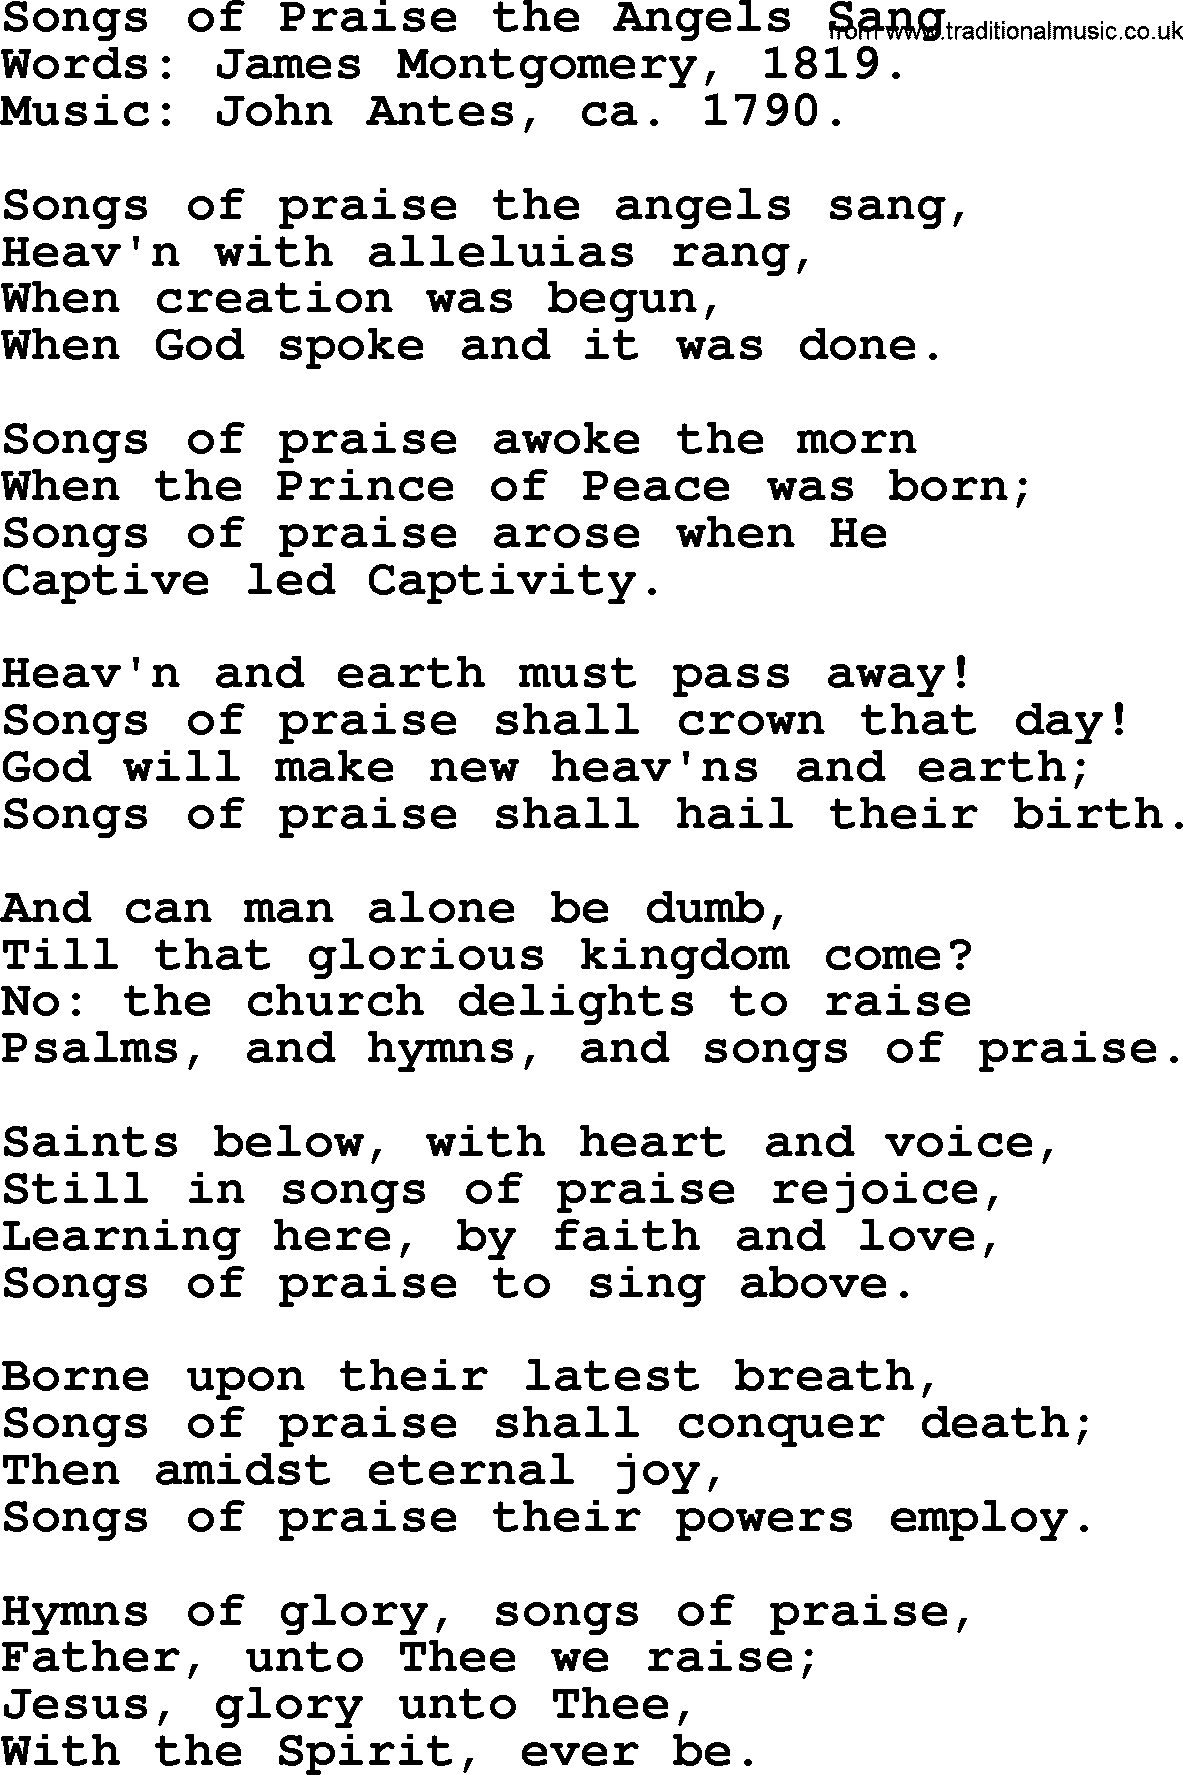 Hymns about Angels, Hymn: Songs Of Praise The Angels Sang.txt lyrics with PDF